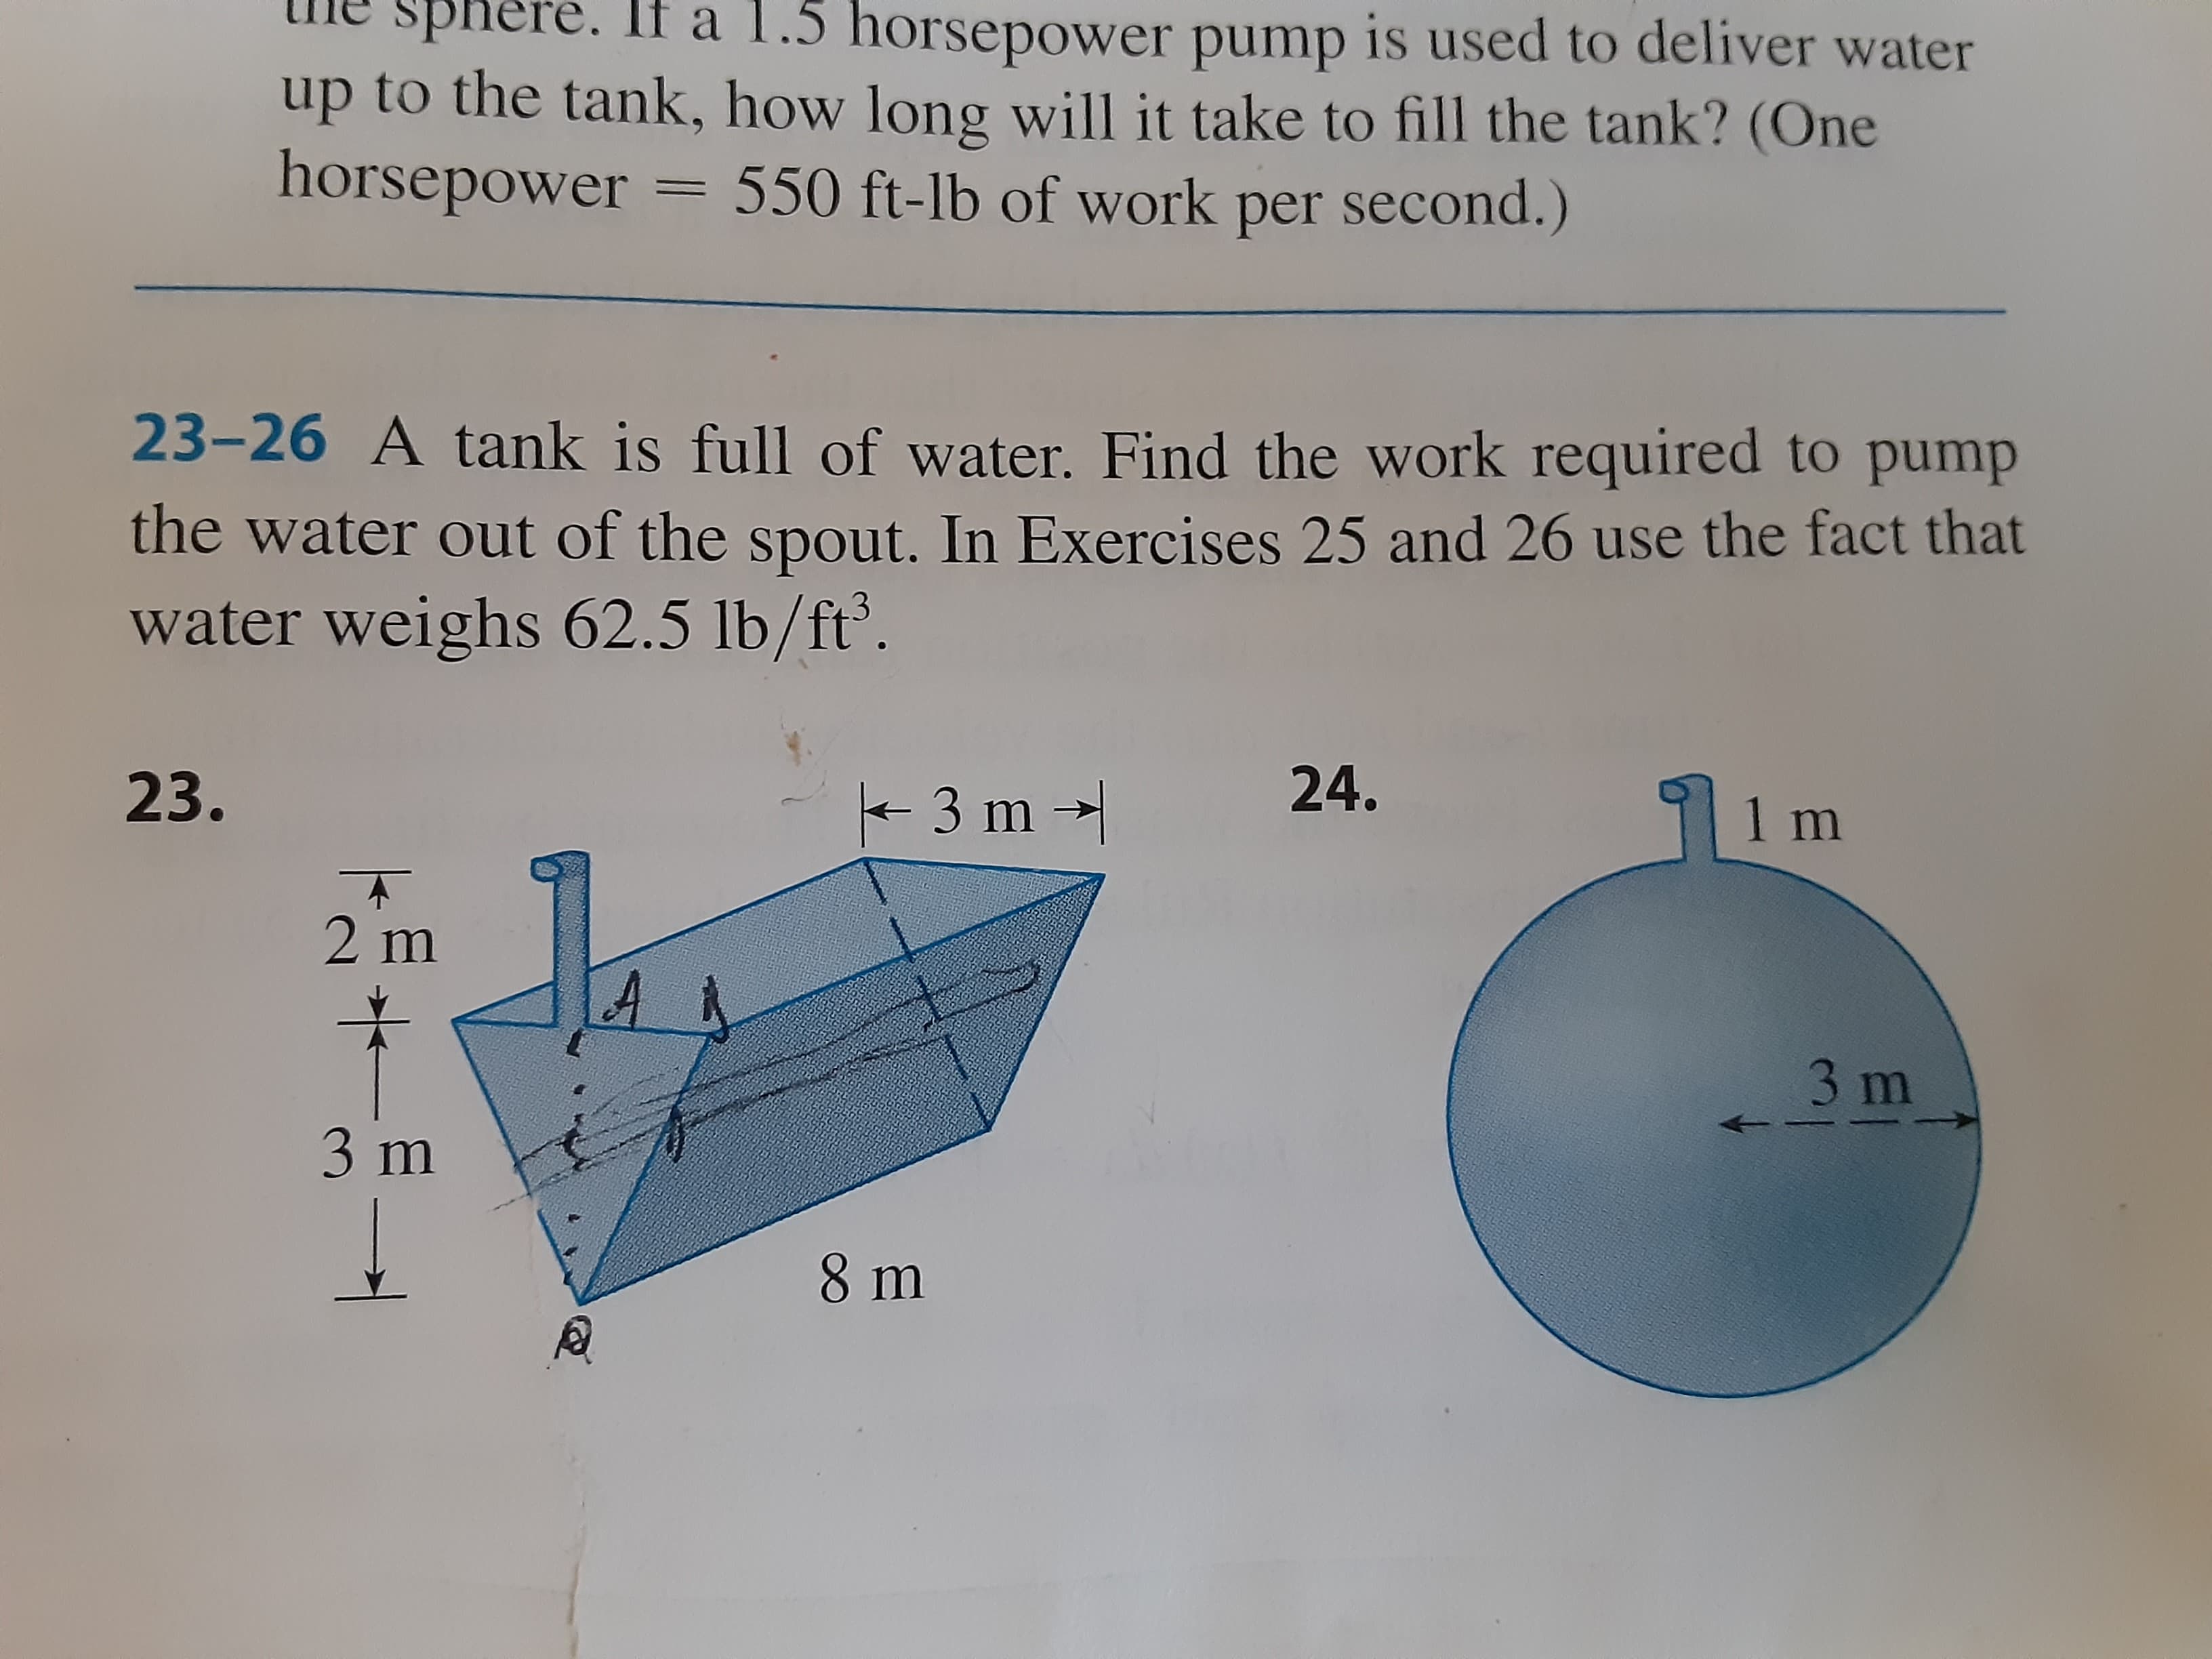 23-26 A tank is full of water. Find the work required to pump
the water out of the spout. In Exercises 25 and 26 use the fact that
water weighs 62.5 lb/ft.
